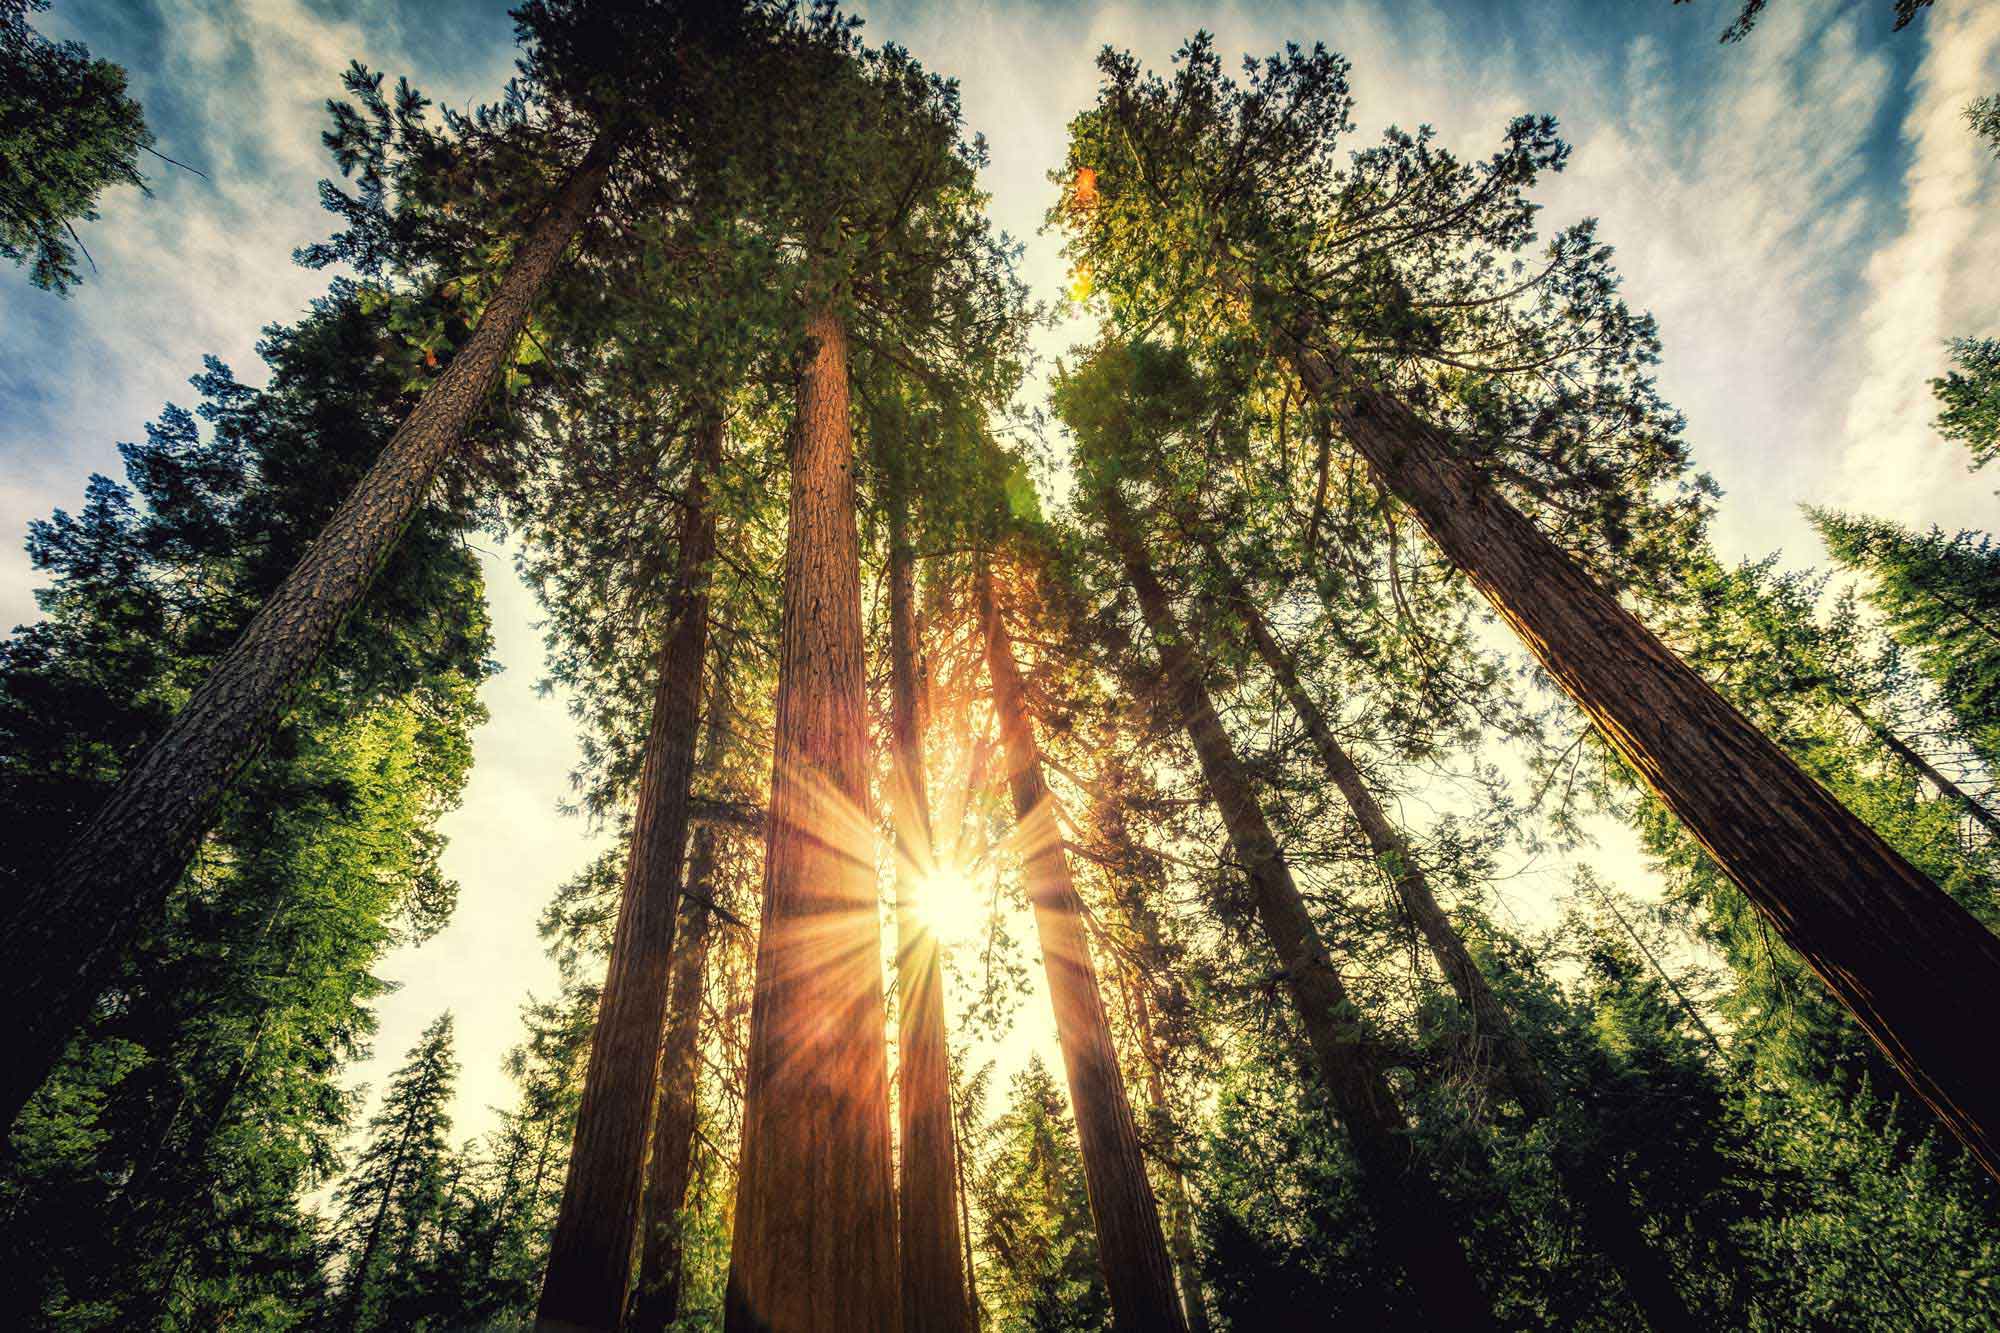 photo - Tall Forest of Sequoias in Yosemite National Park, California